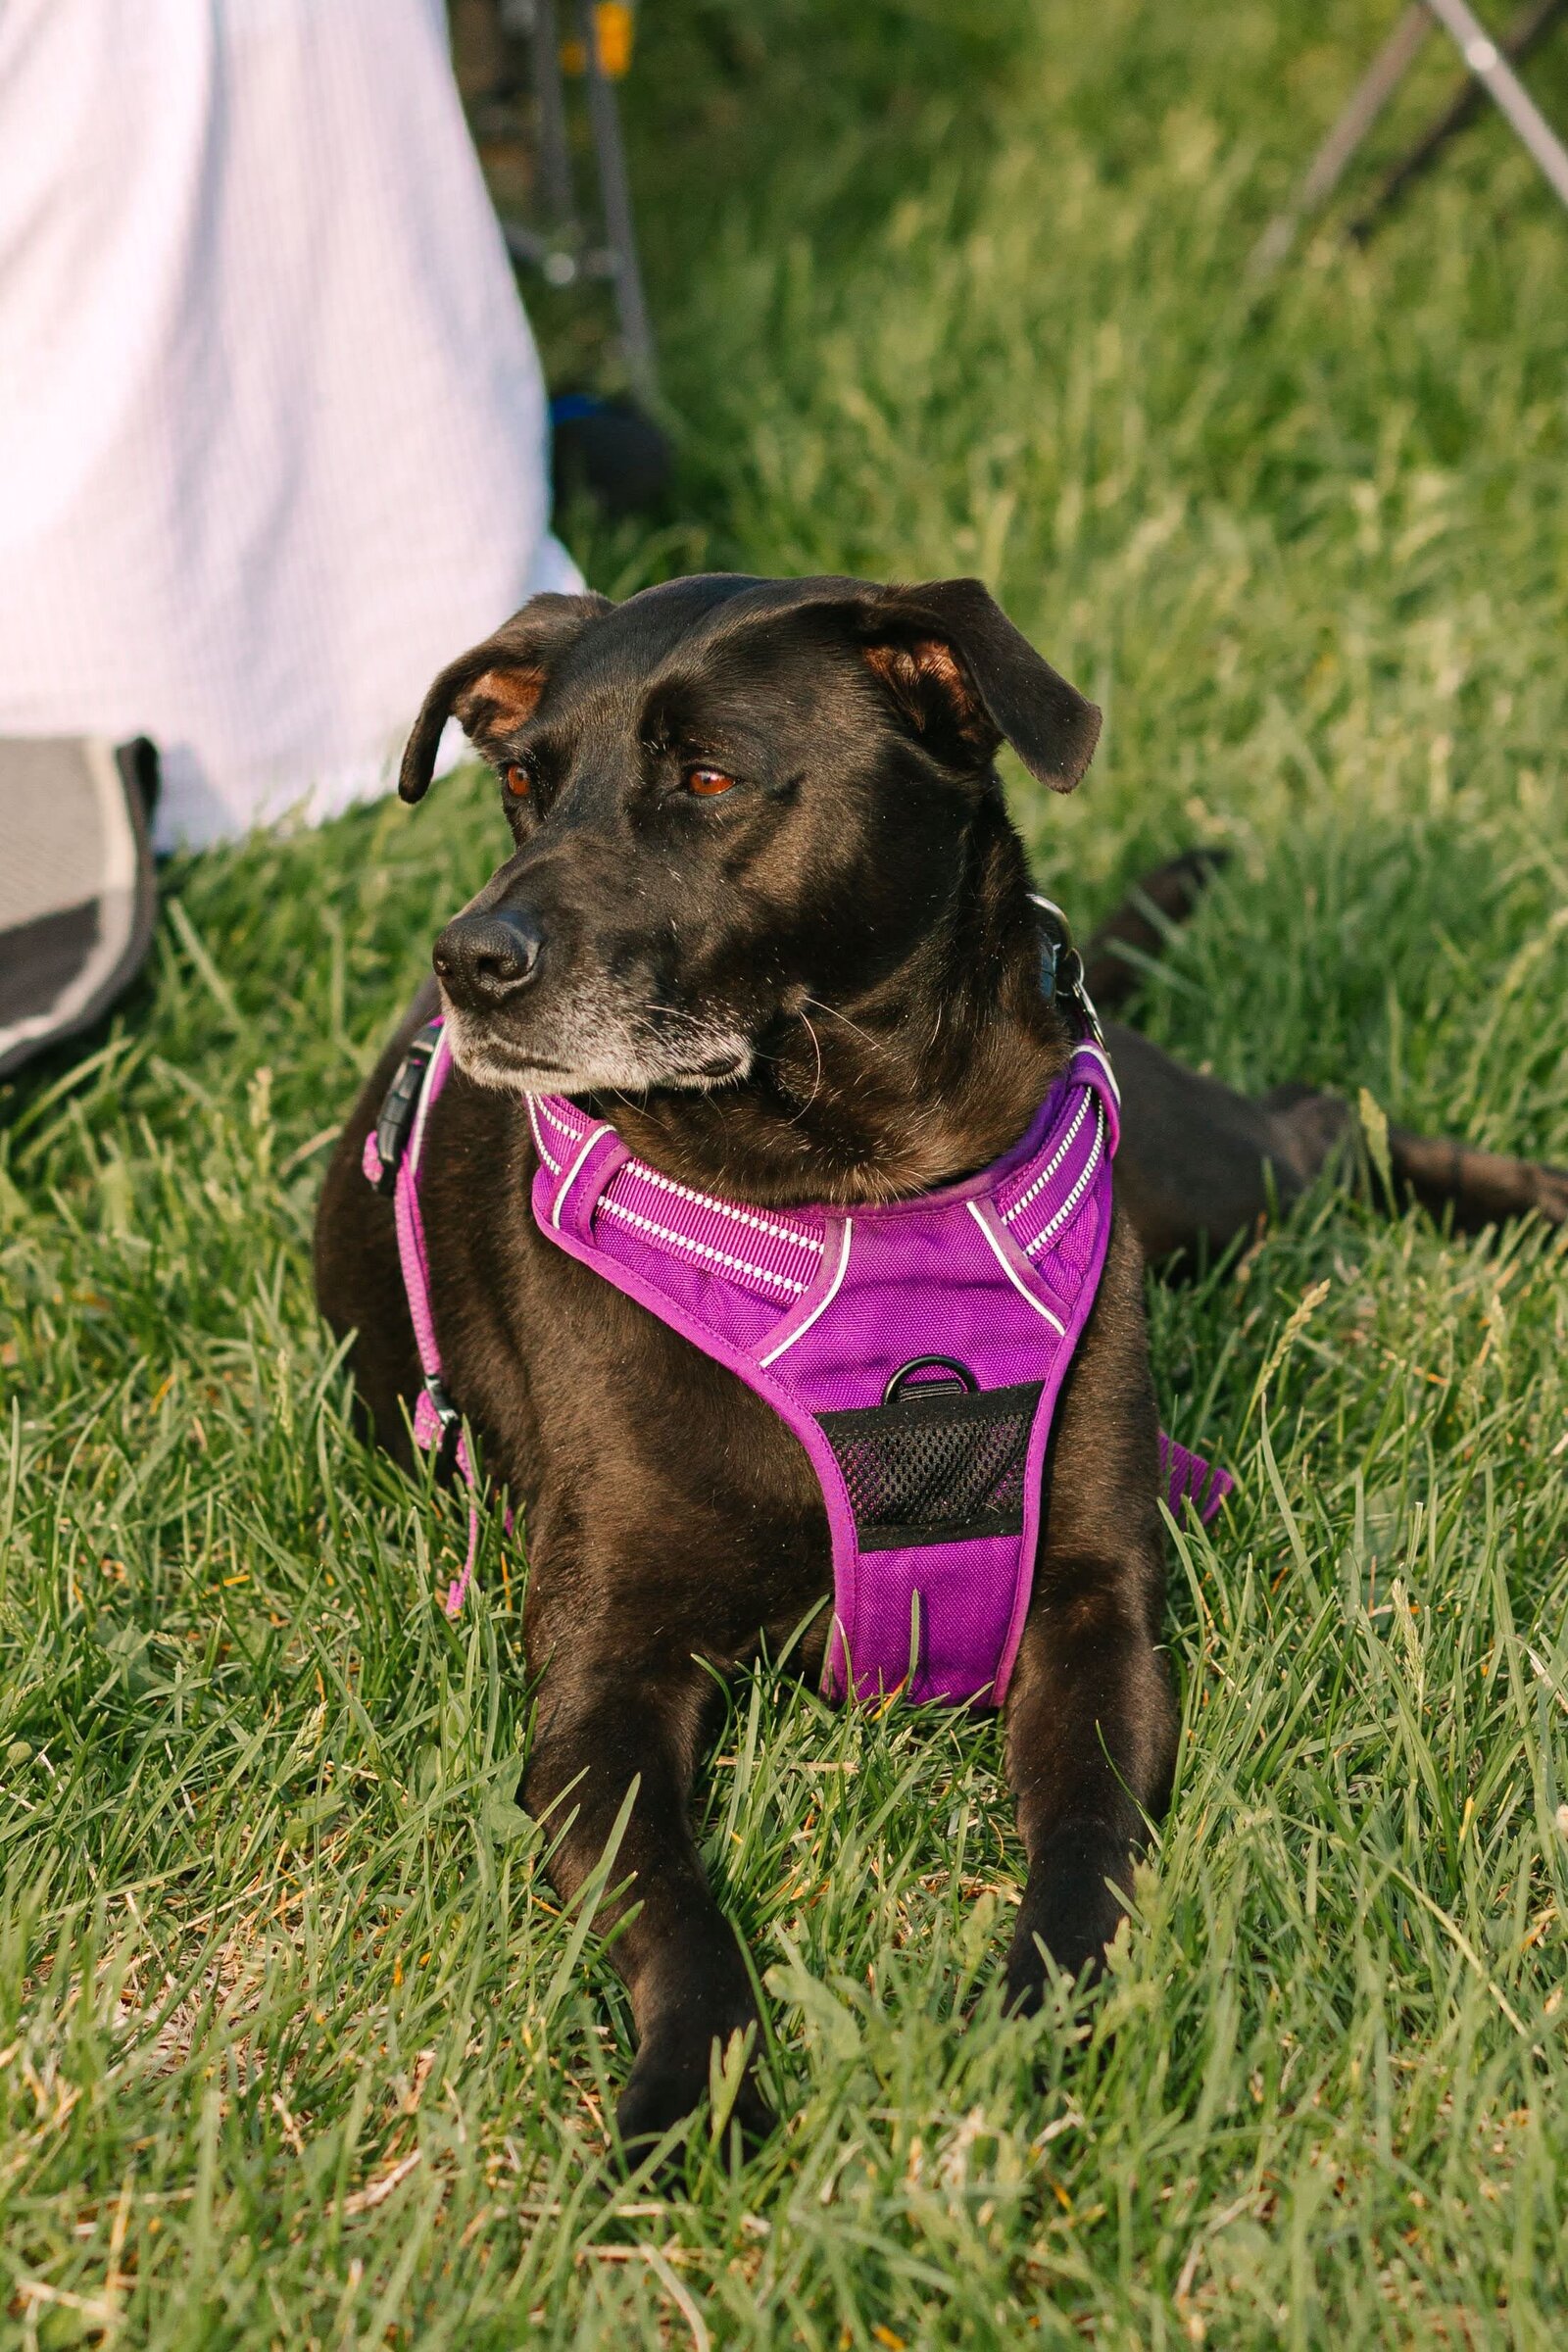 A dog laying in the grass with a purple harness on.